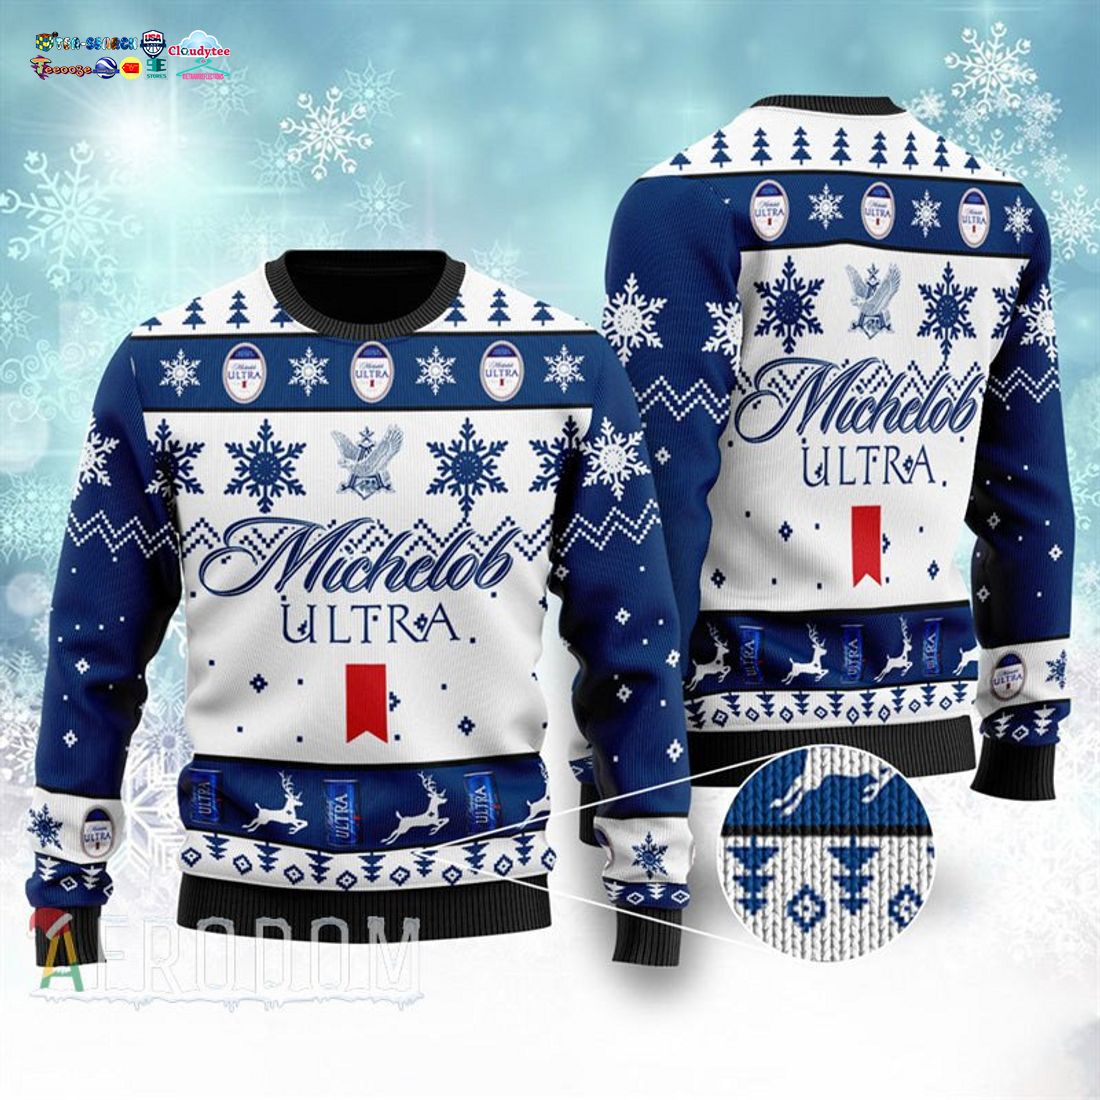 Michelob Ultra Ver 3 Ugly Christmas Sweater